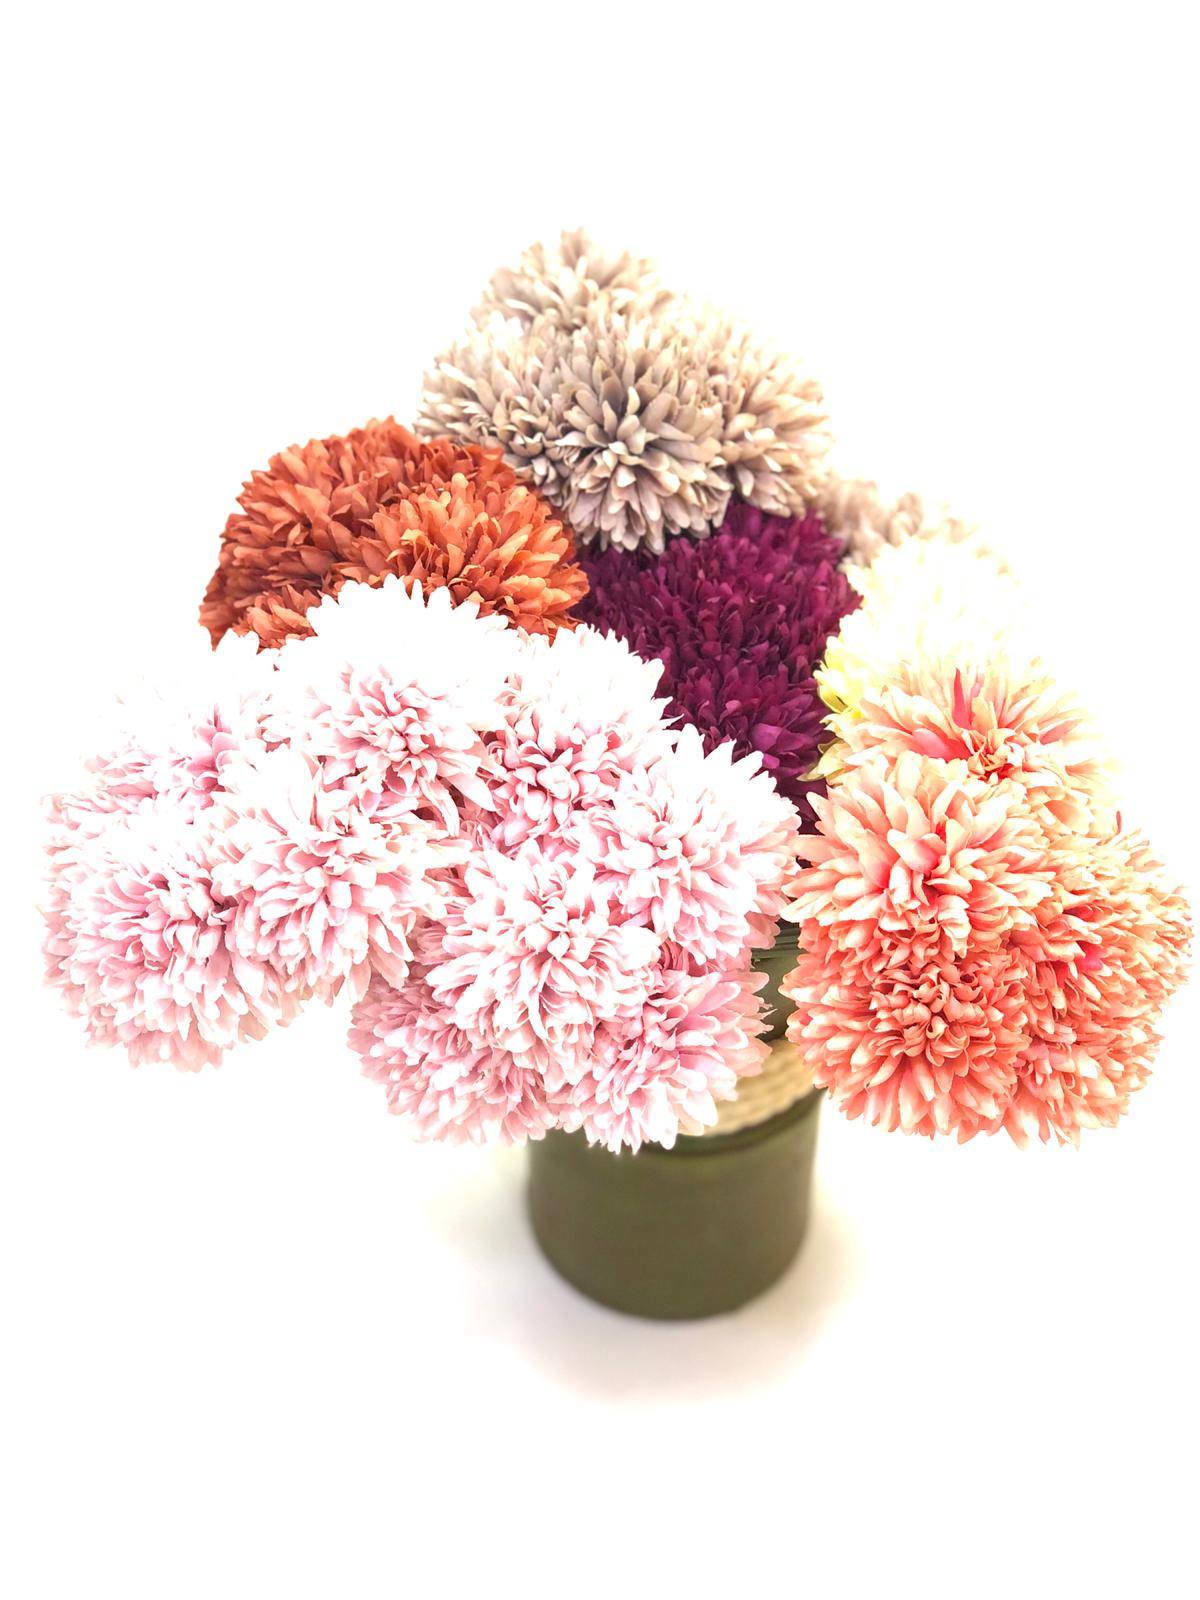 Eye Catchy Bunch Of Flowers In Vibrant Shades For Your Vase Pot By Tamrapatra